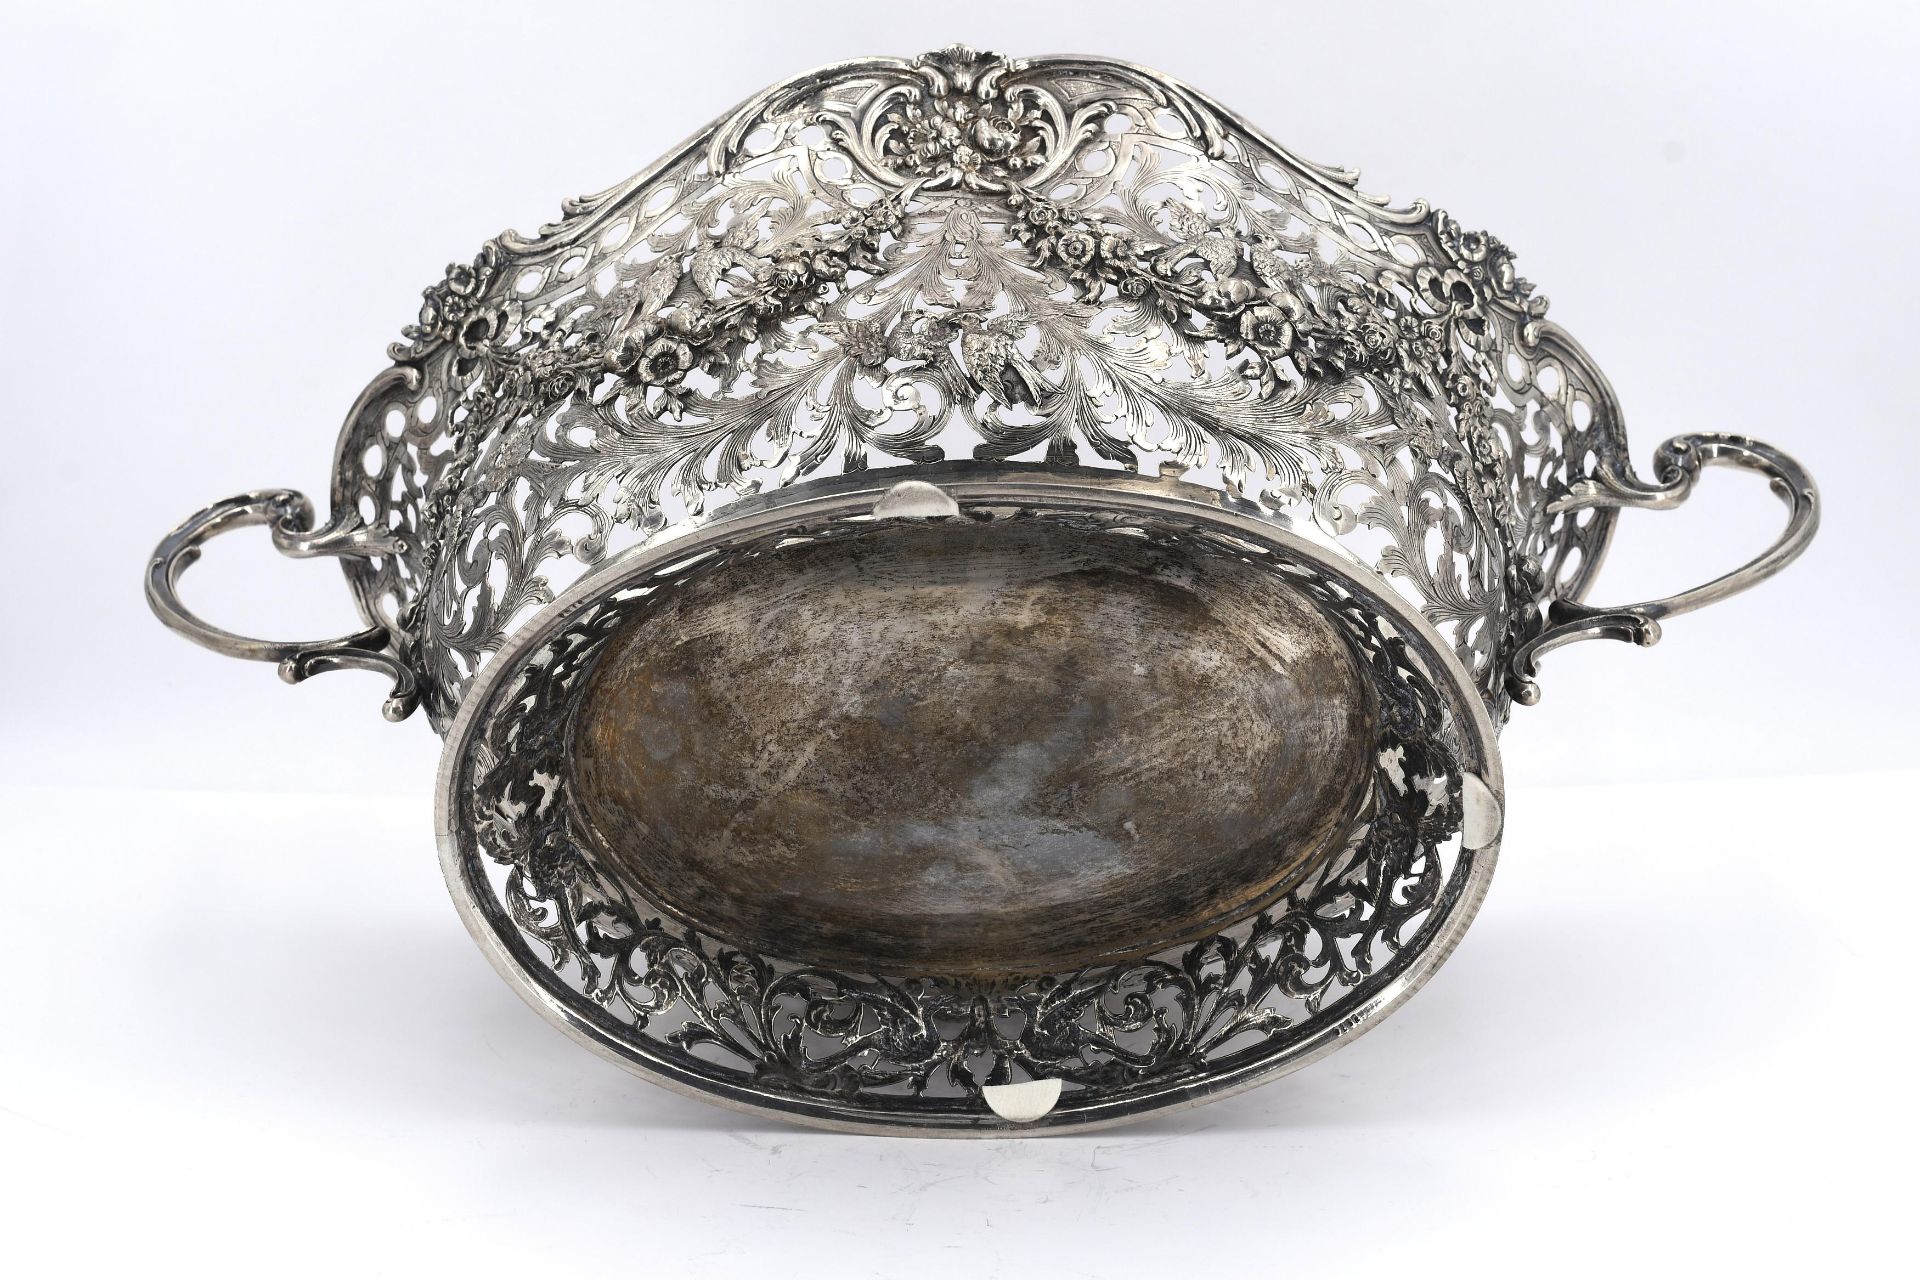 Pair of magnificent large silver bowls with garlands and birds of paradise - Image 10 of 21